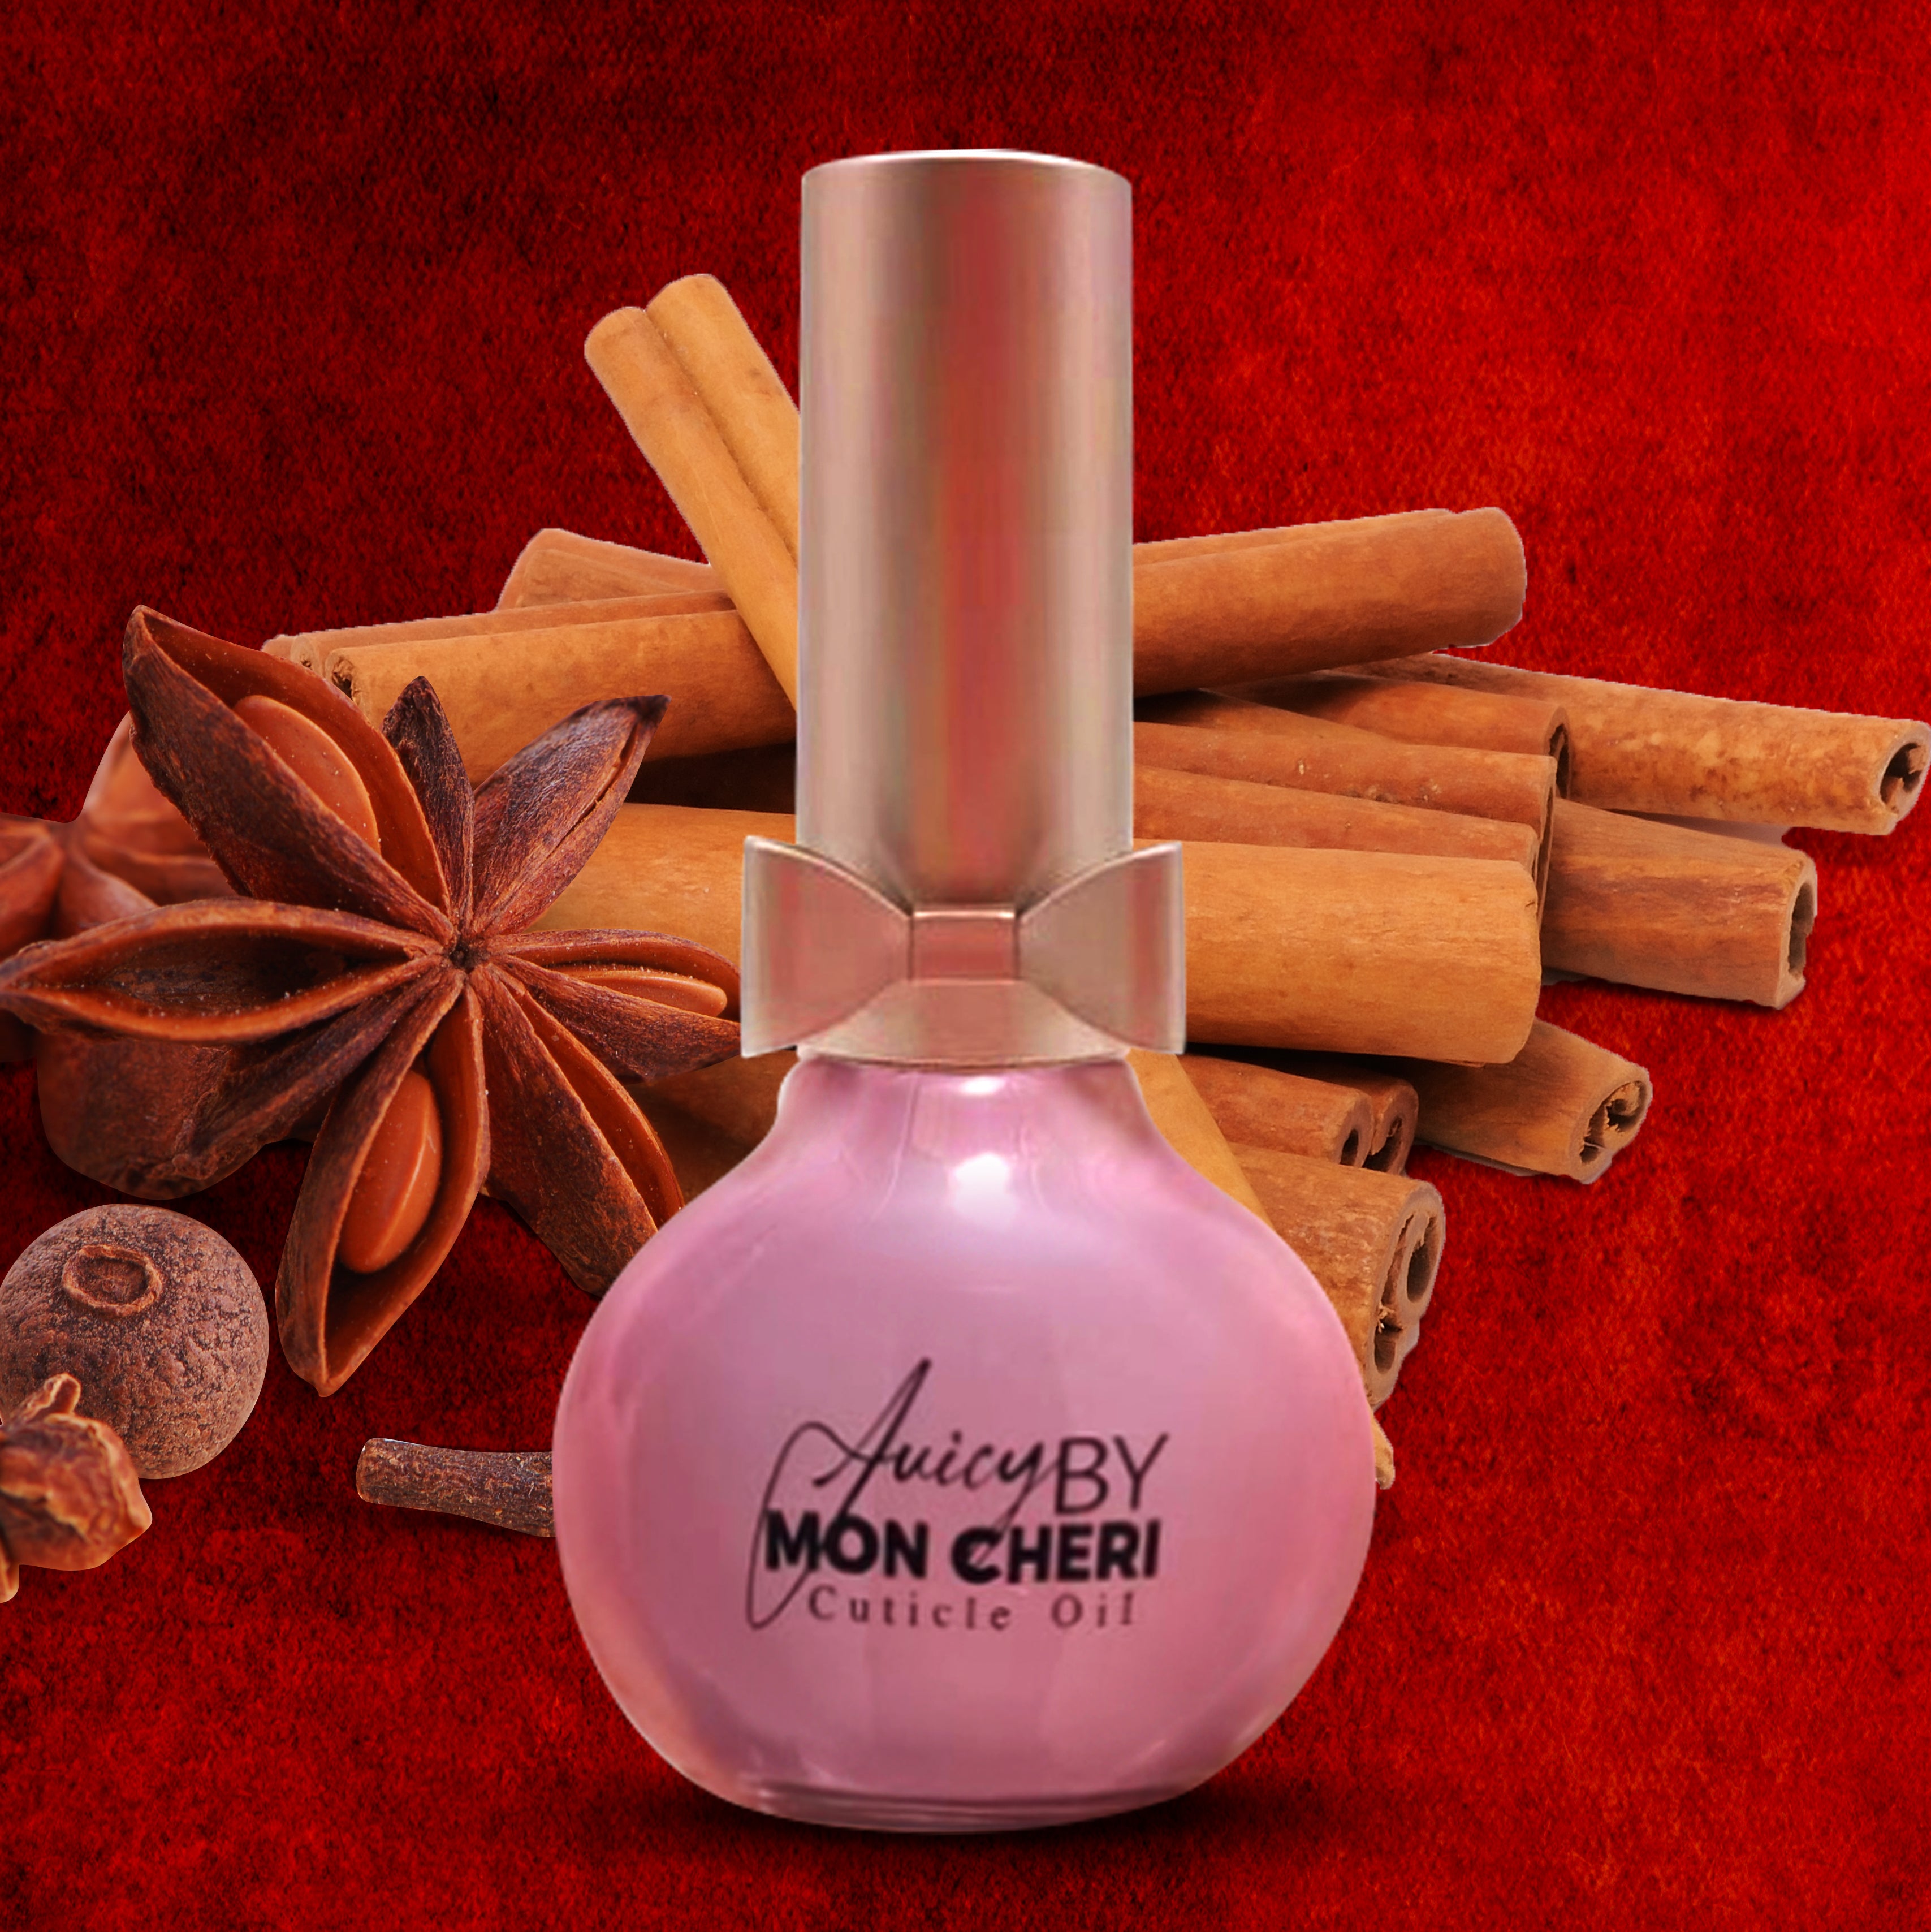 Red Hot Cinnamon Scented Cuticle Oil by Juicy by Mon Cheri